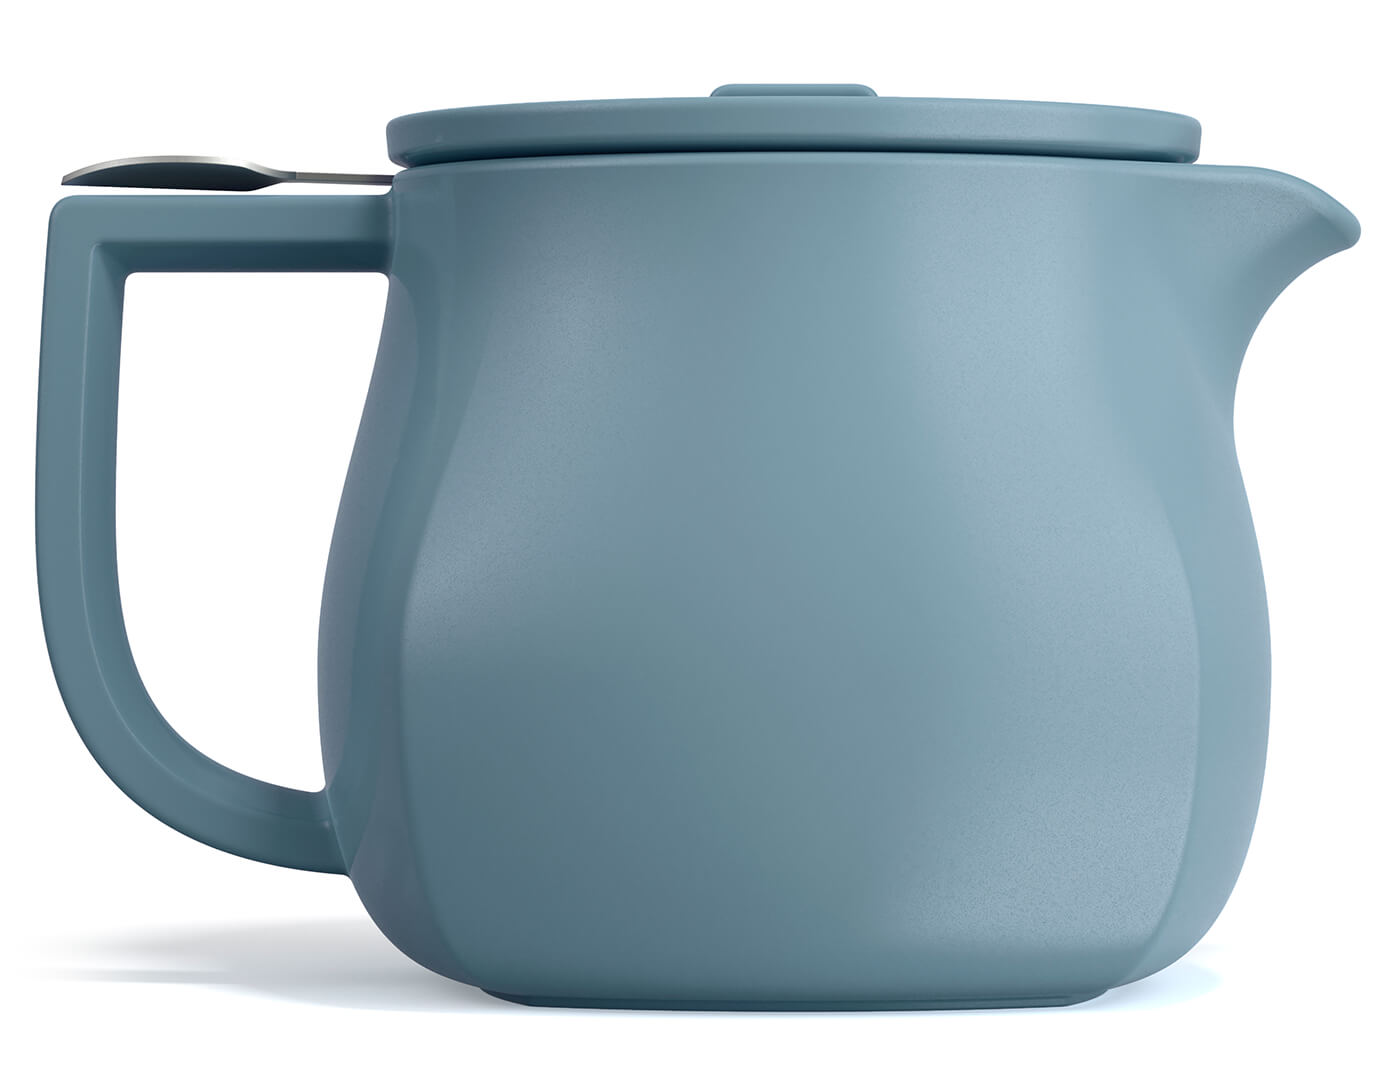 Fiore Teapot in Stone Blue with infuser basket and lid